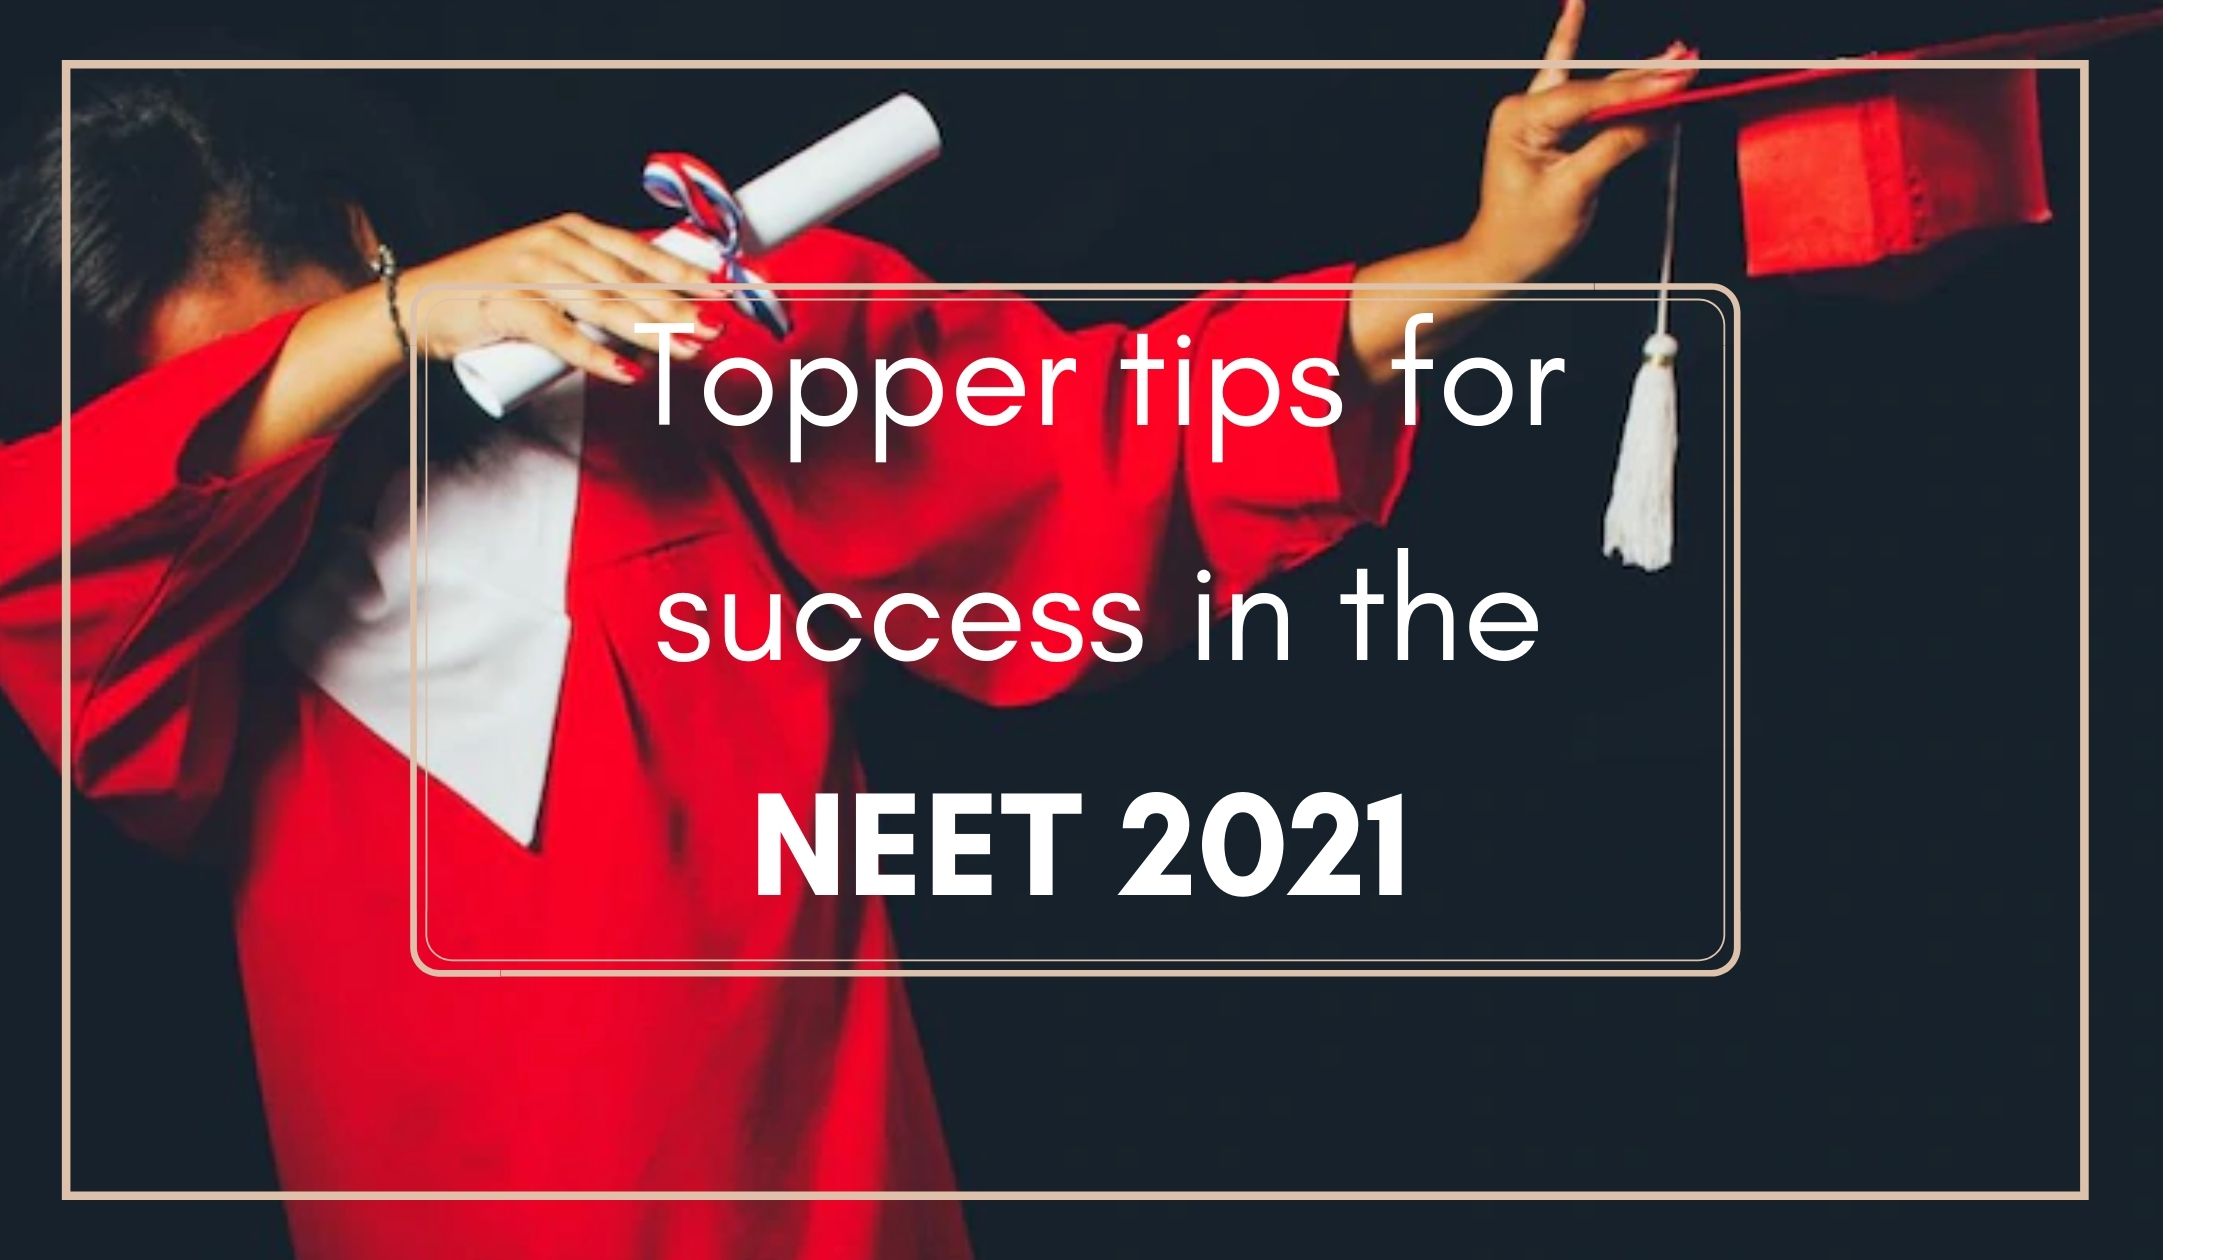 Topper tips for success in the NEET Exam